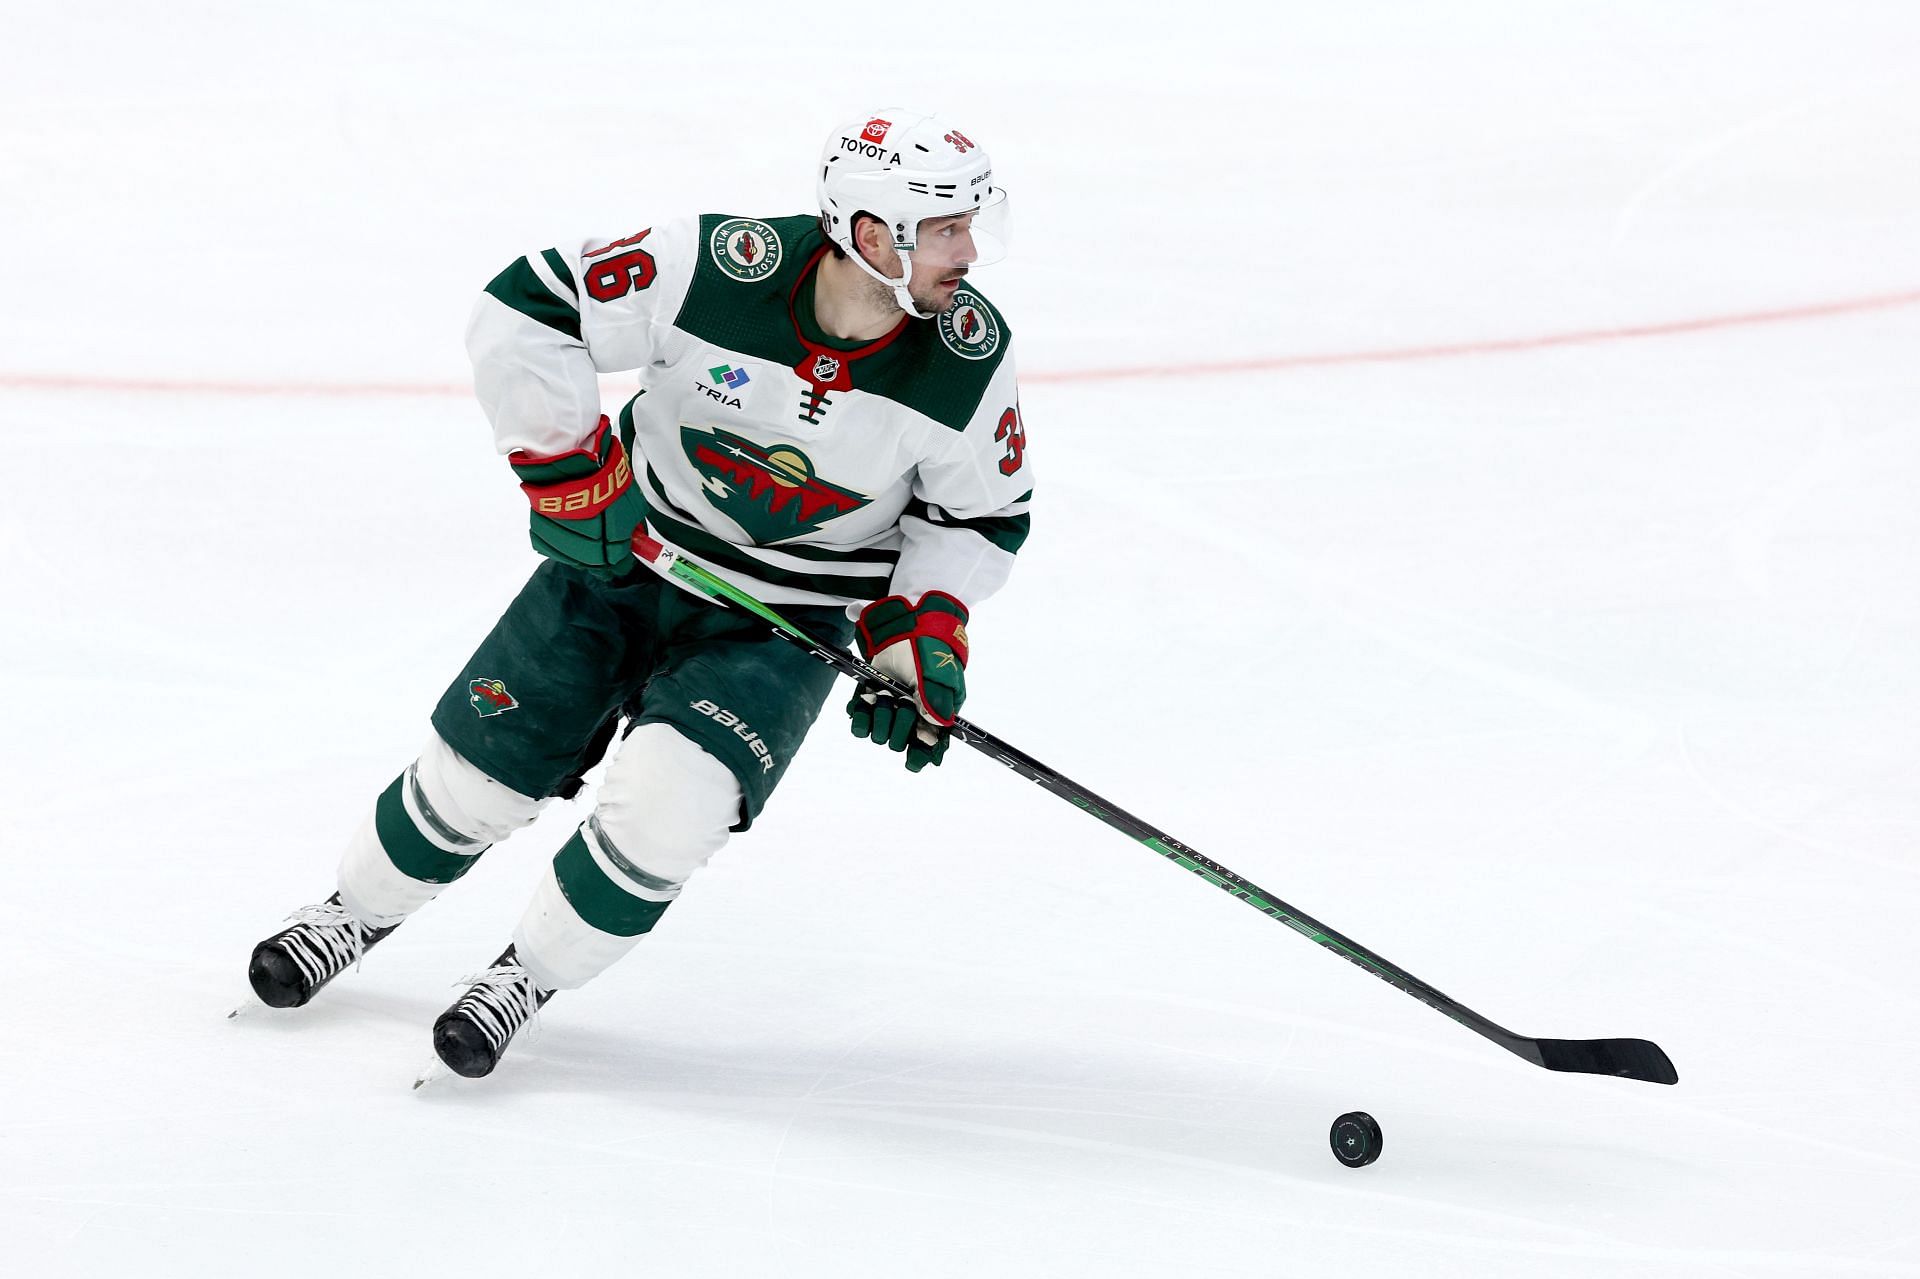 Minnesota Wild Signs Mats Zuccarello to Contract Extension